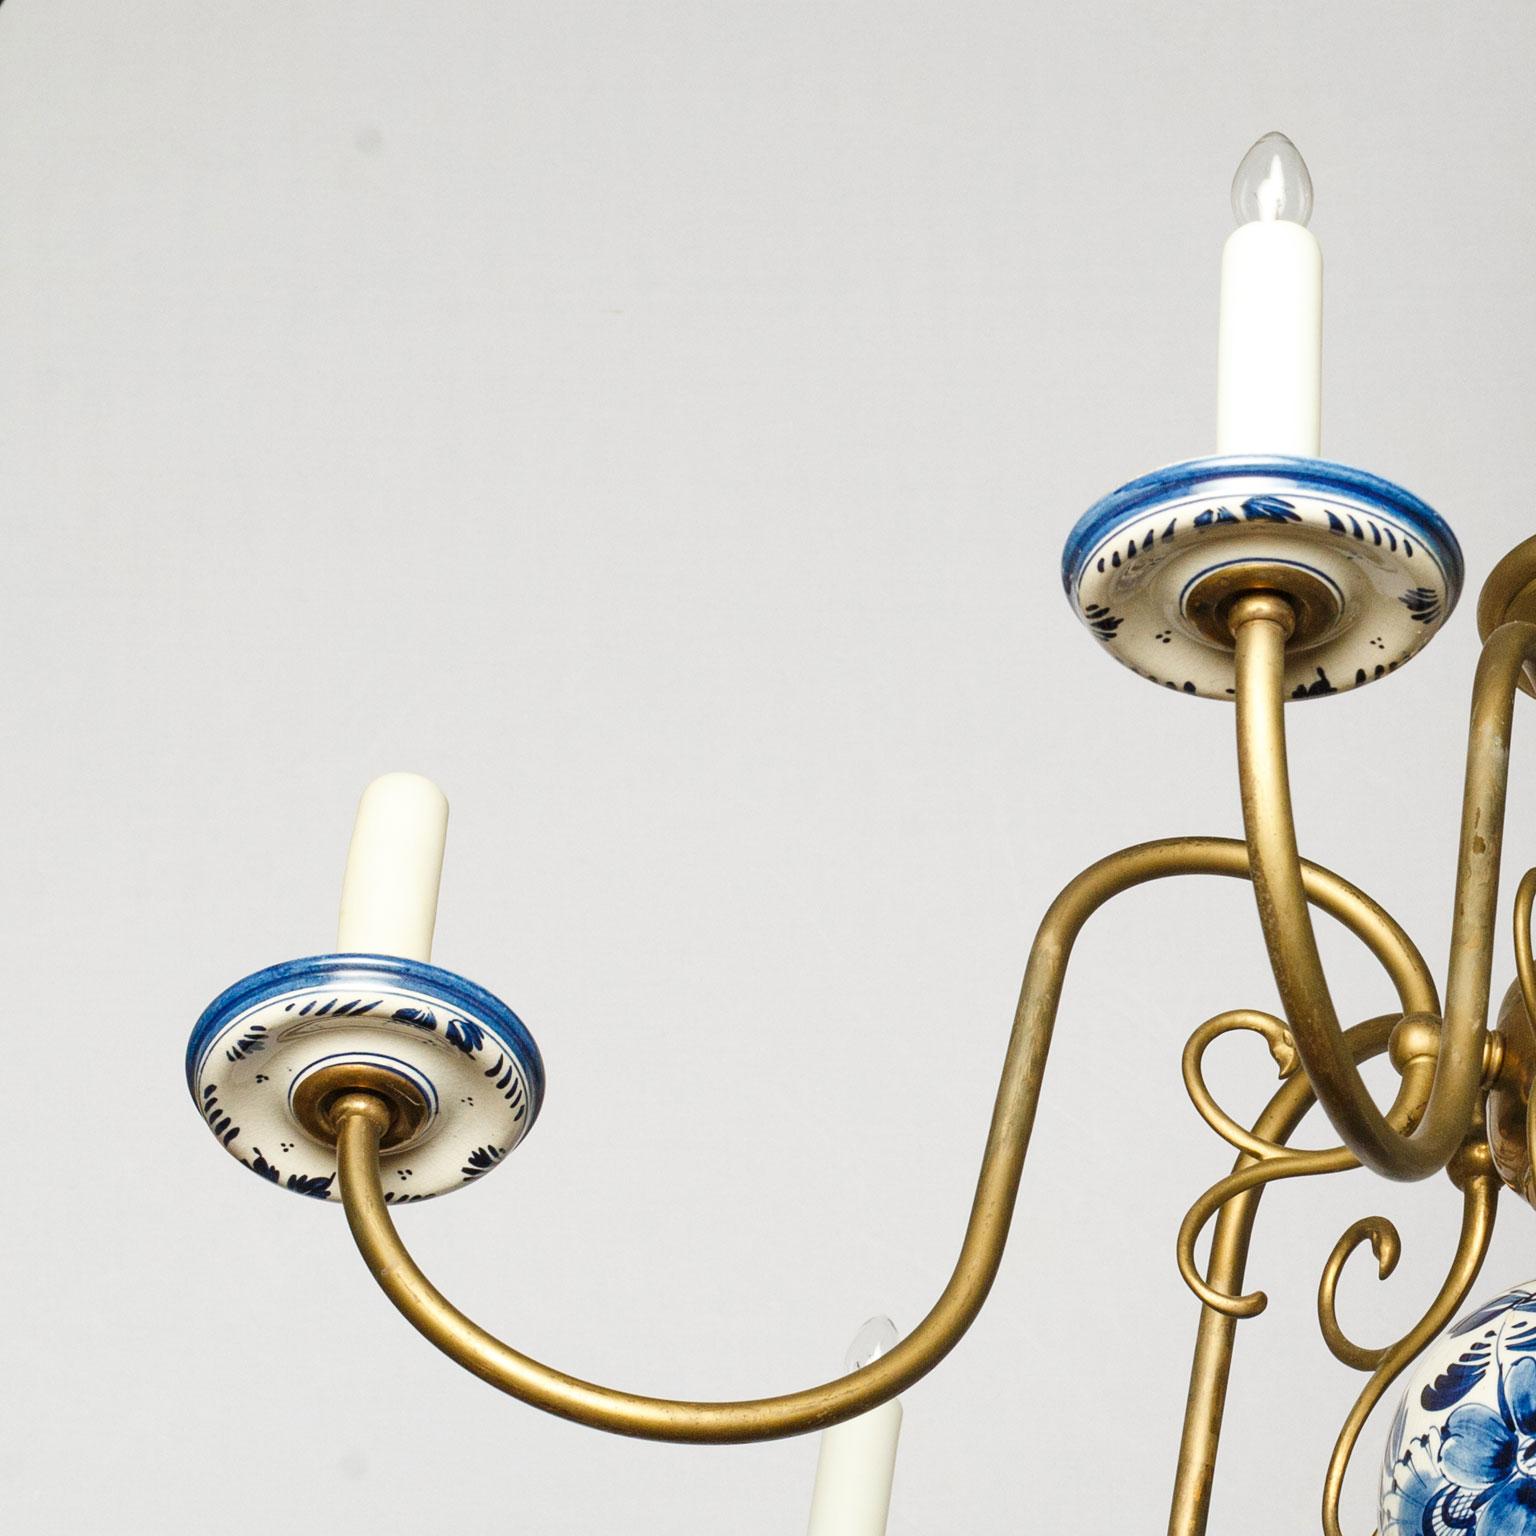 Spectacular delft and bronze chandelier from the Netherlands, circa 1940s. Beautiful and one-of-a-kind Dutch style chandelier in cast bronze. Finished with hand painted (blue on white) lower orb and bobeche cups. The patina on this light is